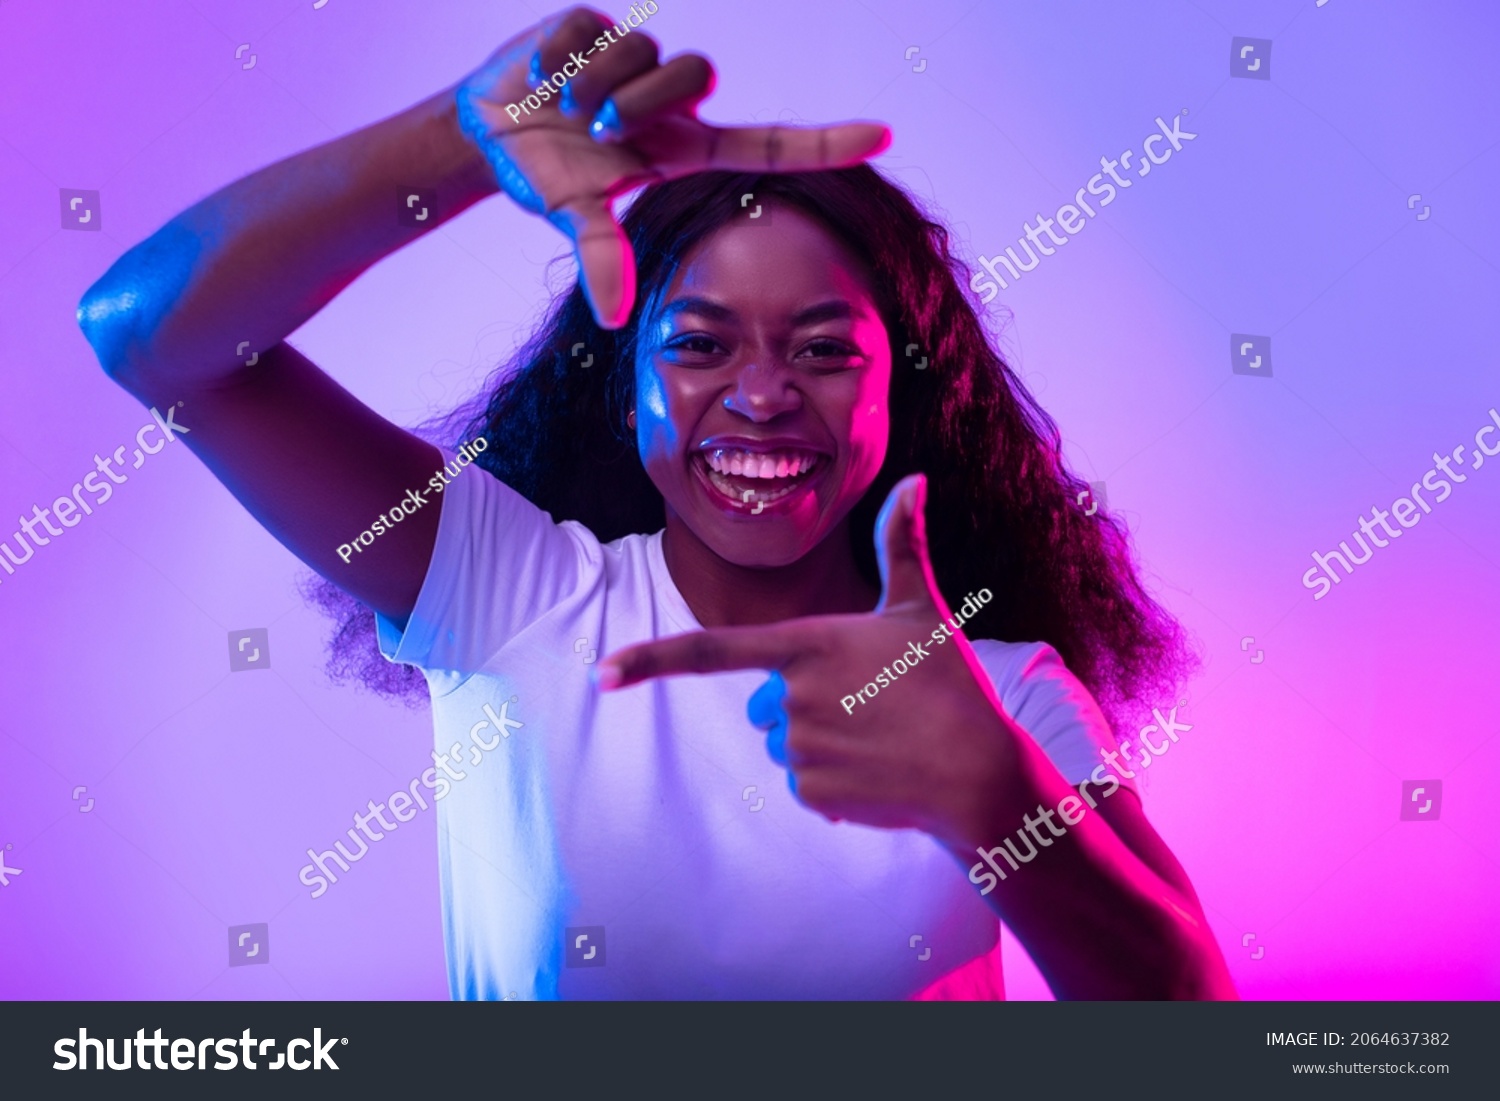 Capturing moments. Happy black woman making picture frame with fingers, looking at camera and smiling for photo in neon light. African American lady showing photograph gesture #2064637382